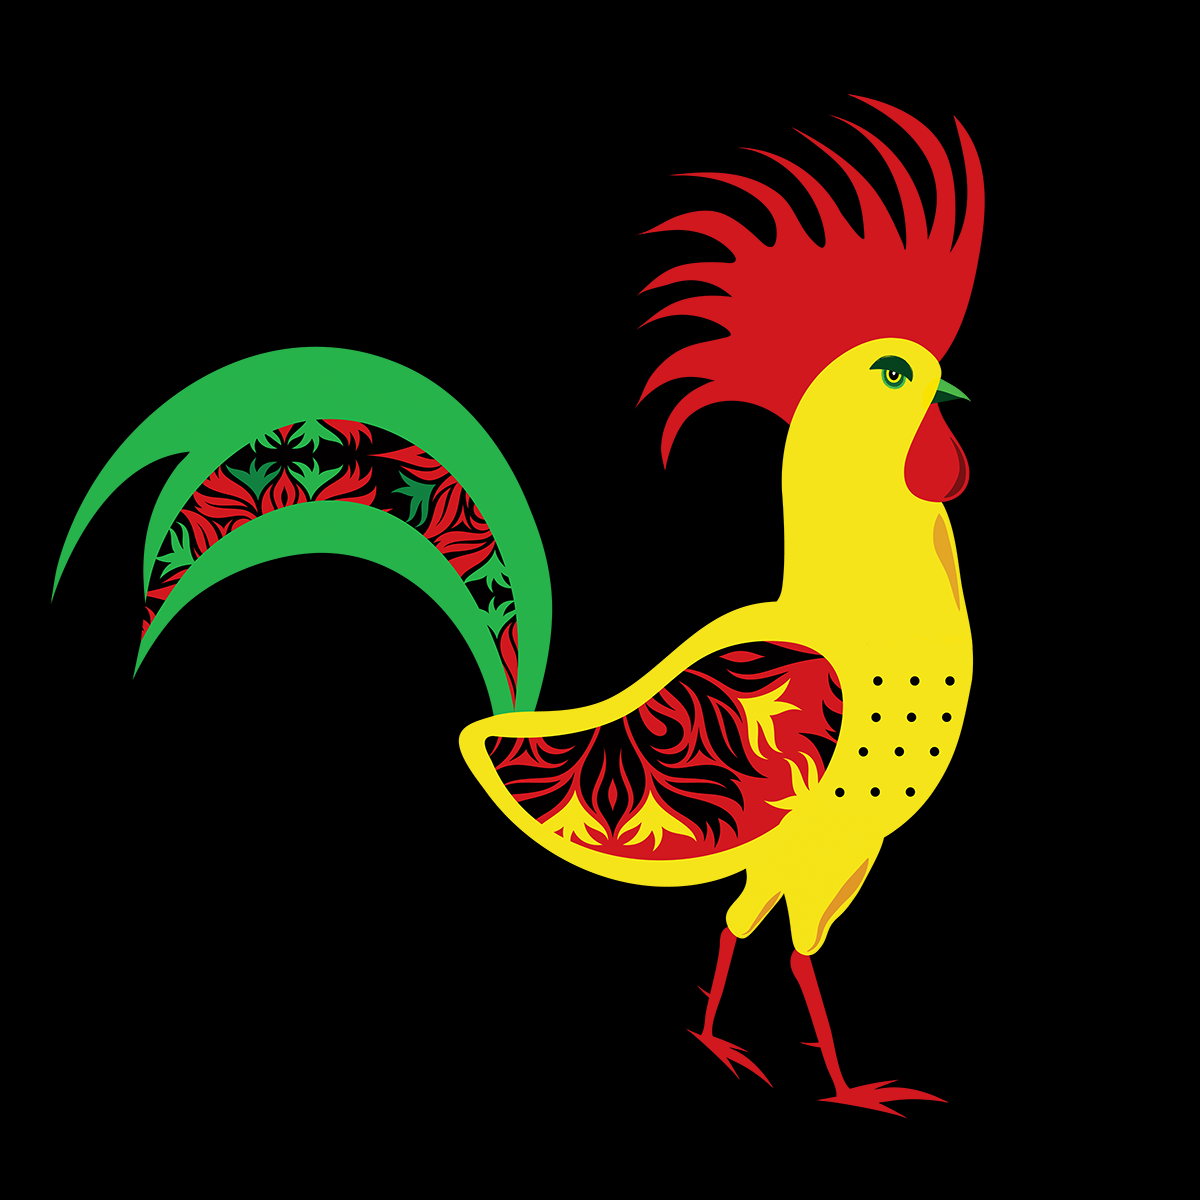 Brightly coloured rooster illustration in red, green and yellow
